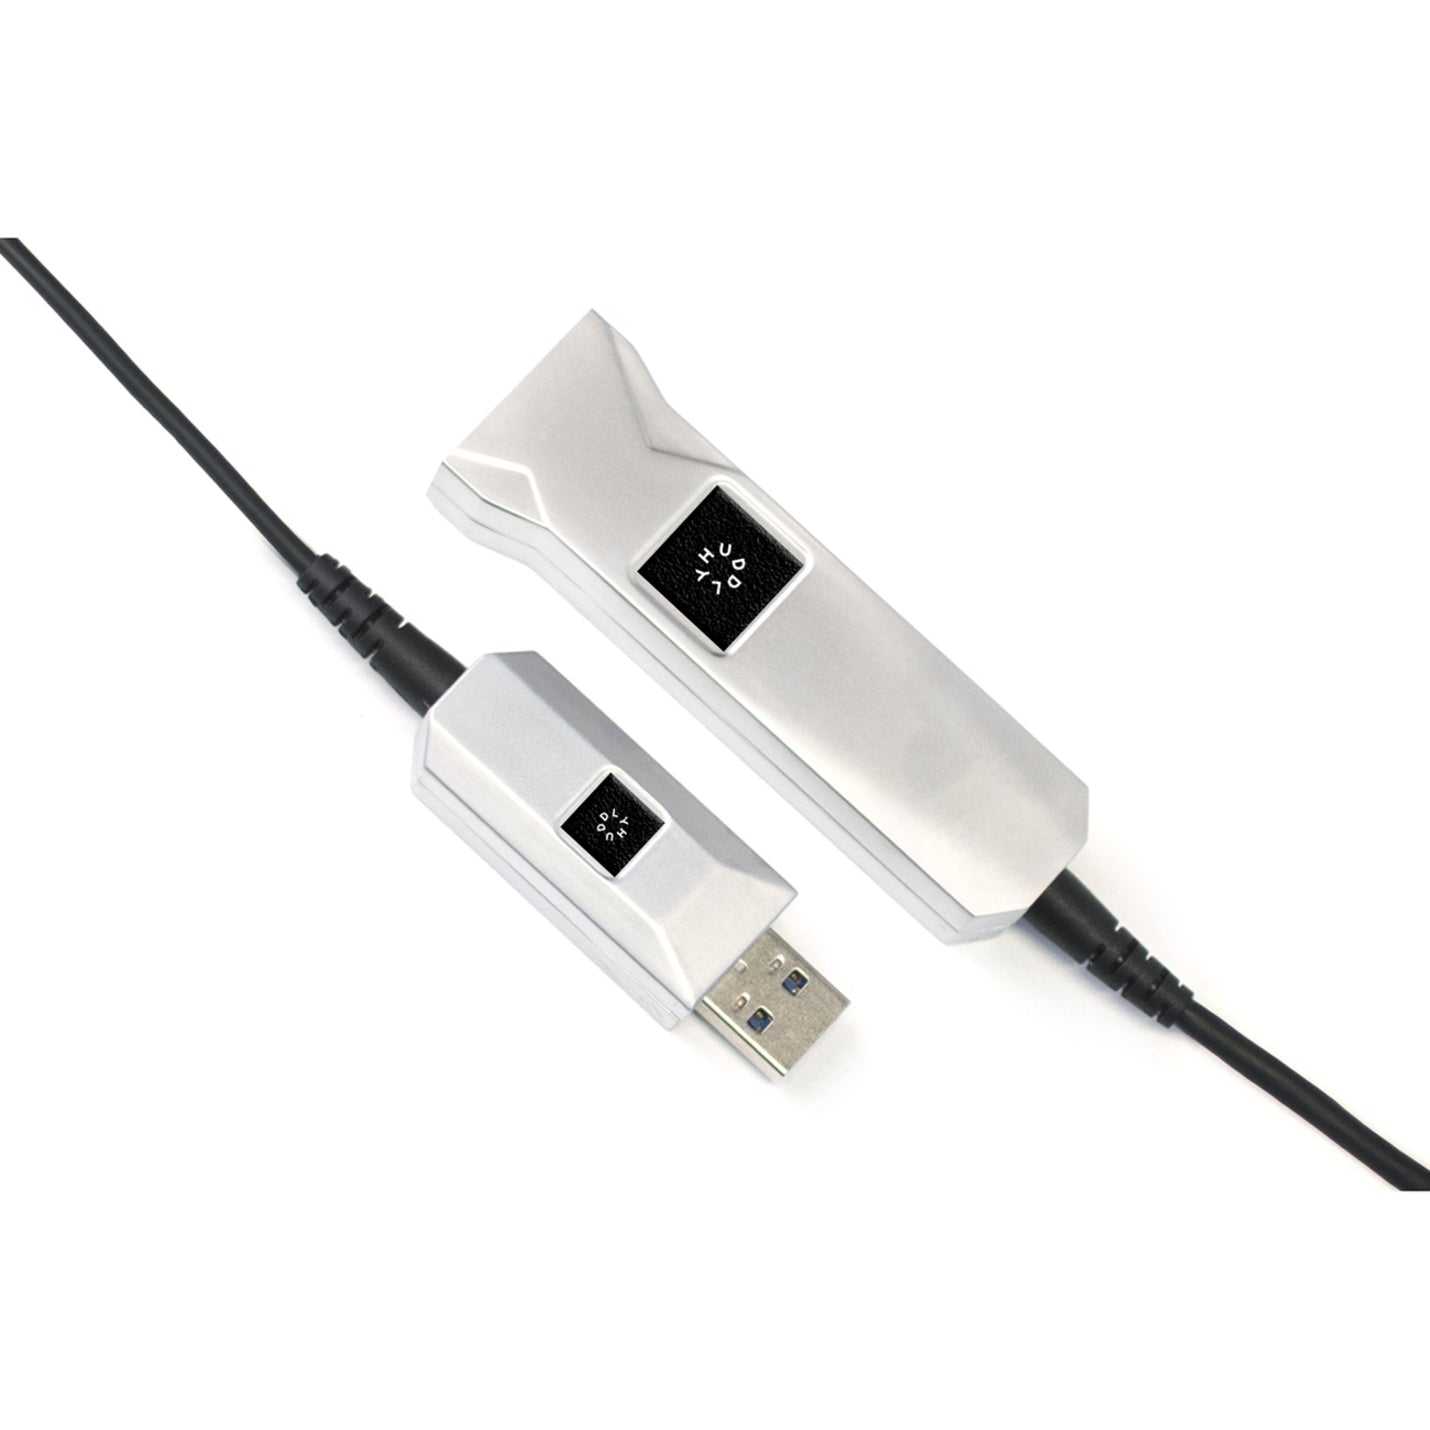 Huddly 7090043790450 USB AOC Data Transfer Cable, 32.81 ft Extension Cable